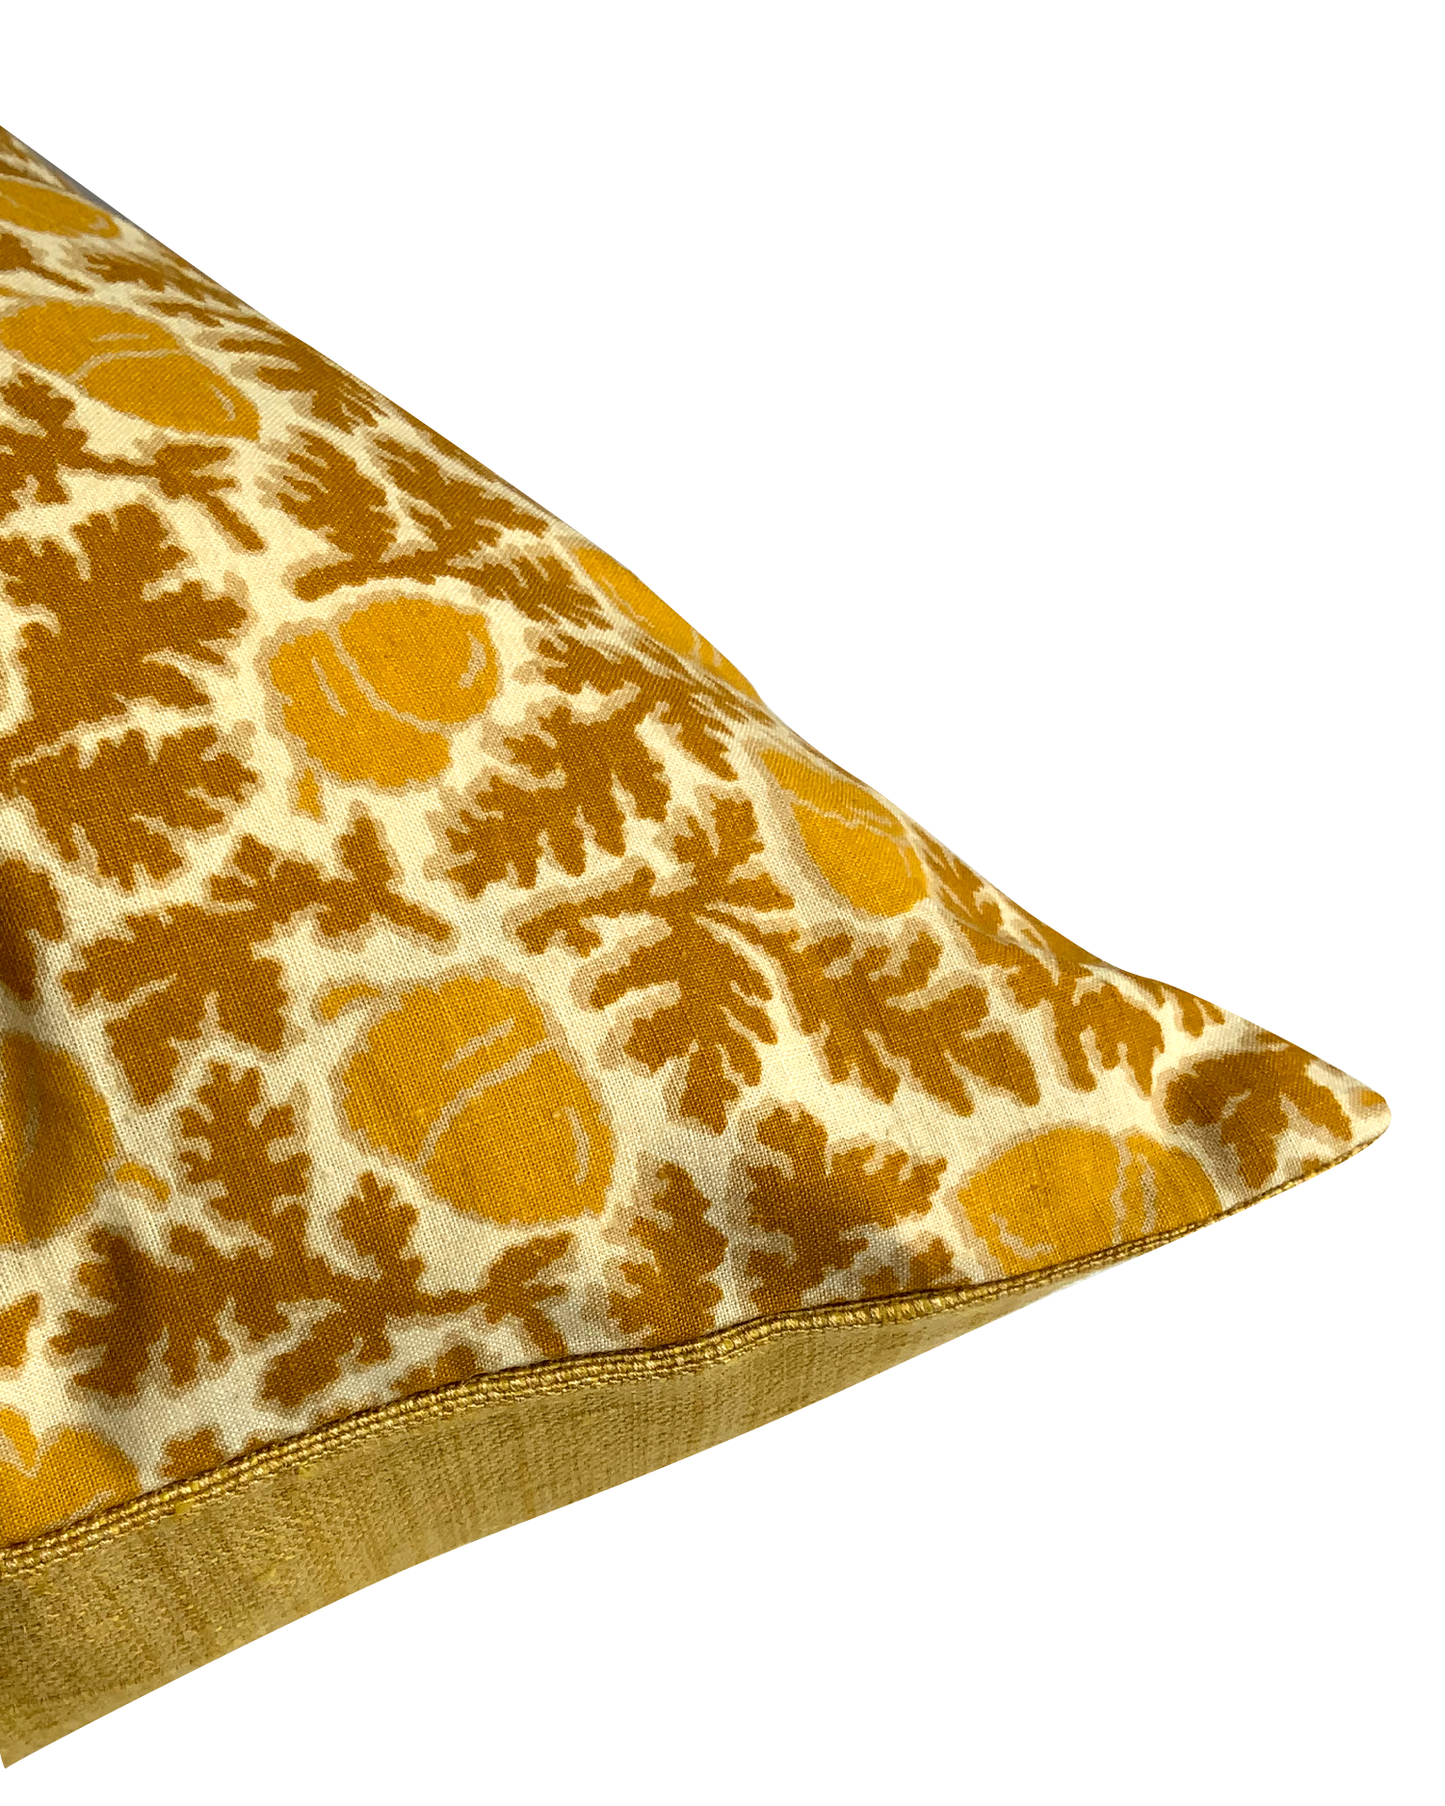 Cushion Cover in “Acorn” Print in yellow/ochre